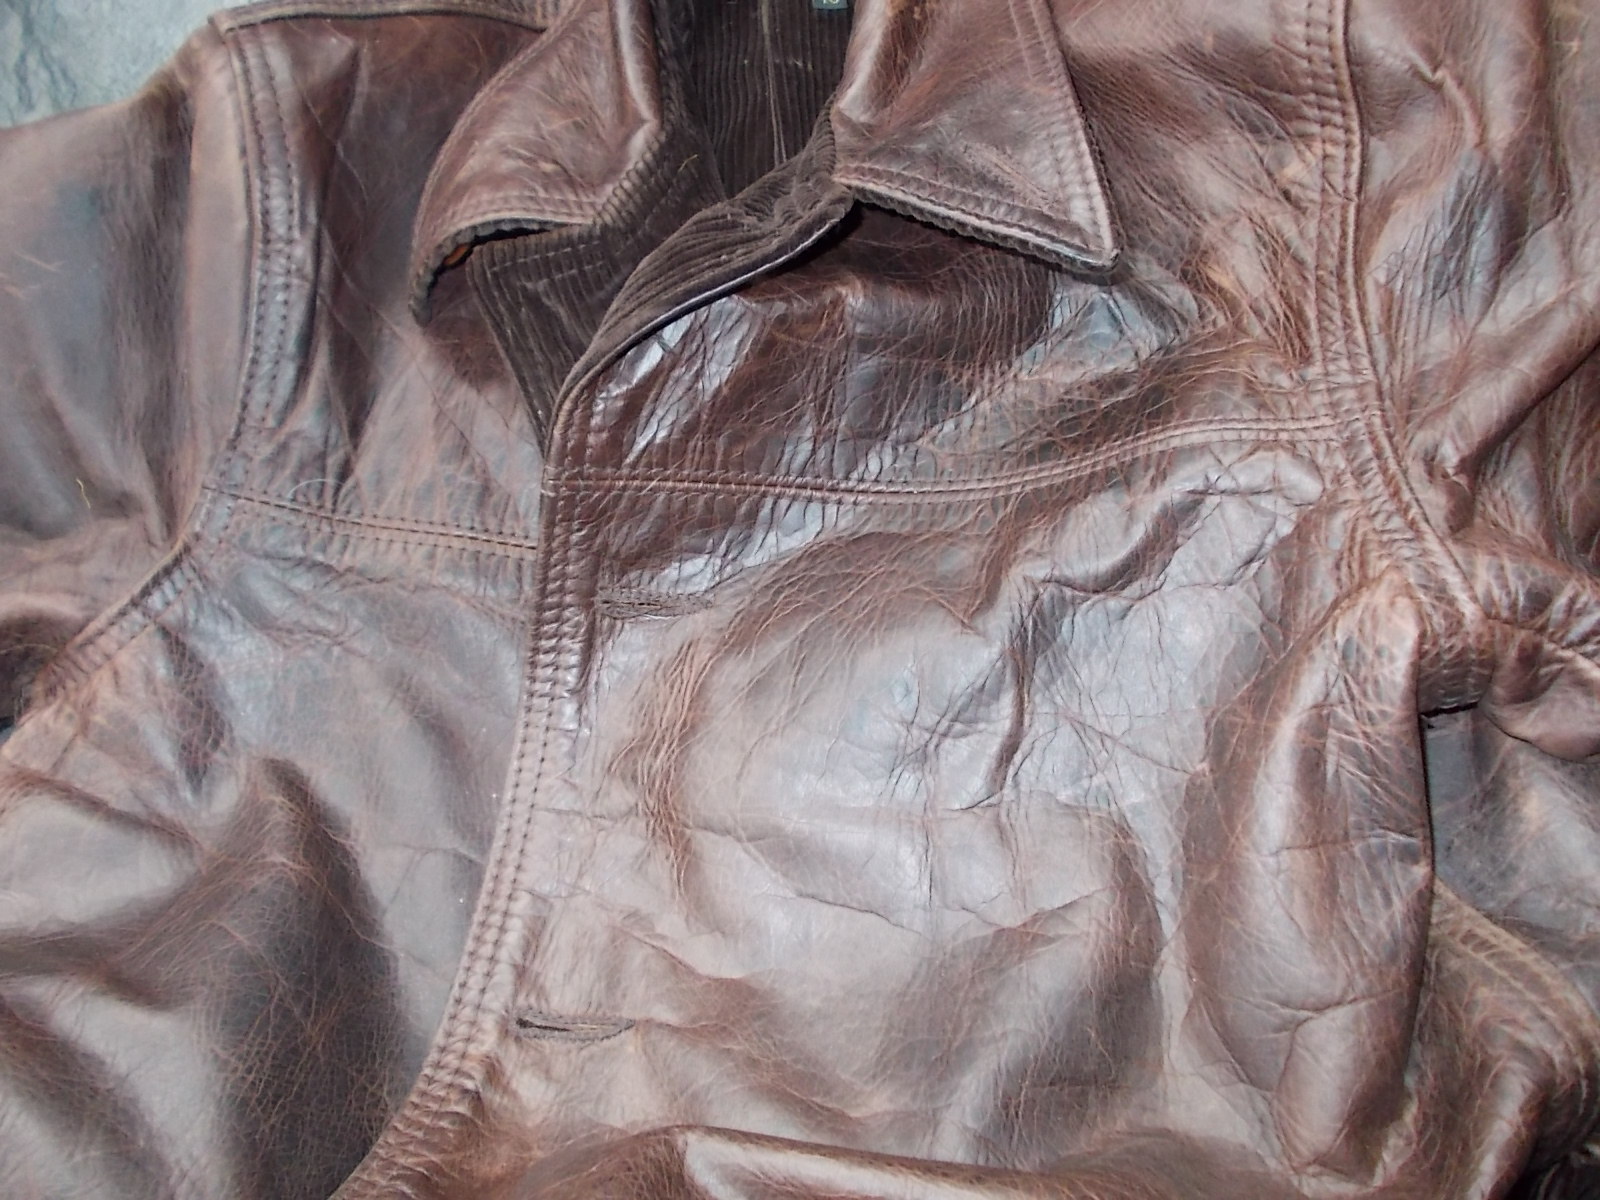 Two tier Eastman | Vintage Leather Jackets Forum